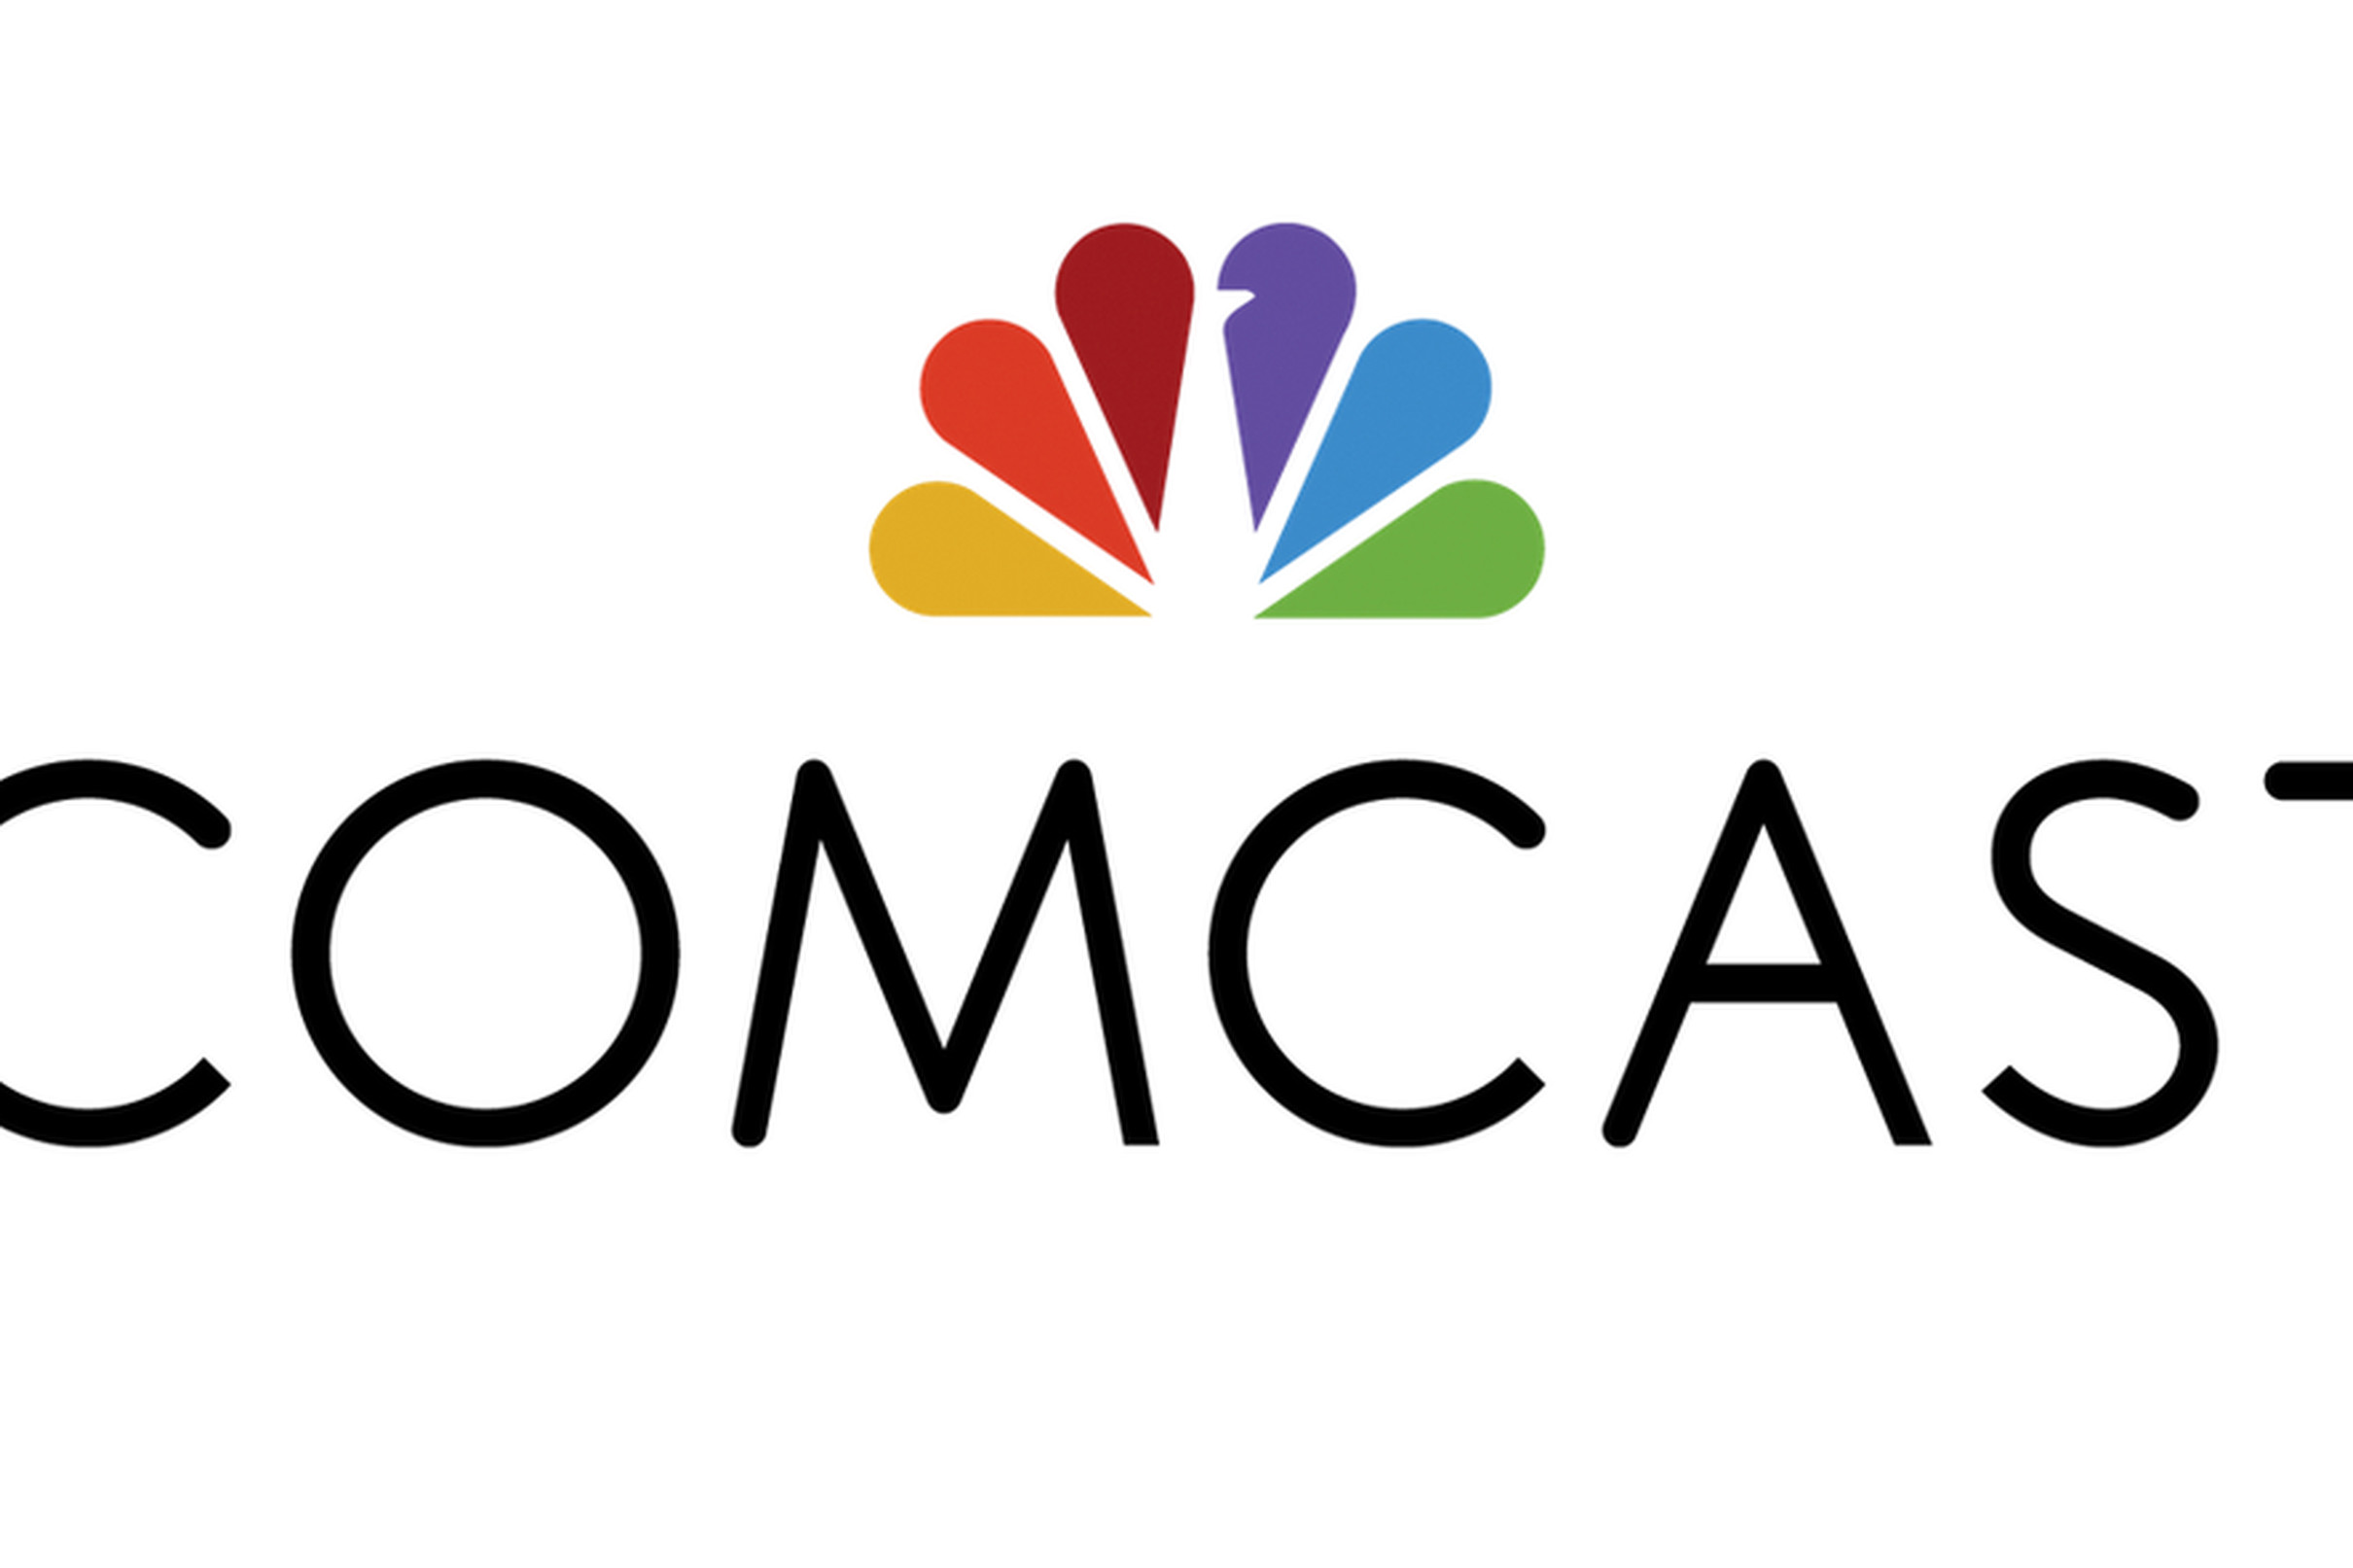 Comcast adopts NBC peacock as part of new logo The Verge